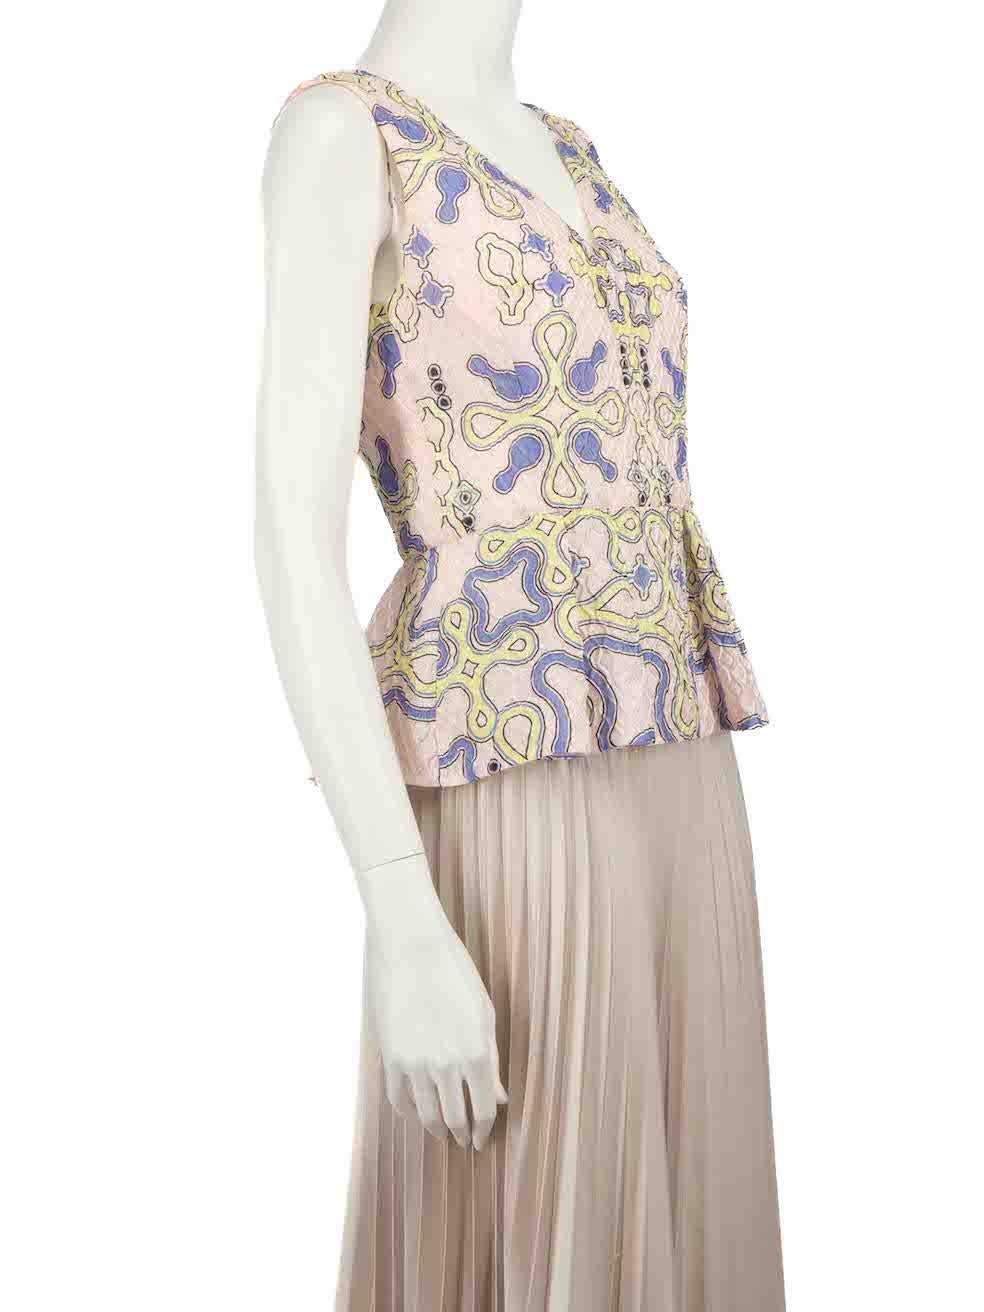 CONDITION is Very good. Hardly any visible wear to top is evident on this used Peter Pilotto designer resale item.
 
 
 
 Details
 
 
 Pink
 
 Polyester
 
 Peplum top
 
 Abstract print
 
 Textured
 
 Sleeveless
 
 V-neck
 
 Back zip fastening
 
 
 
